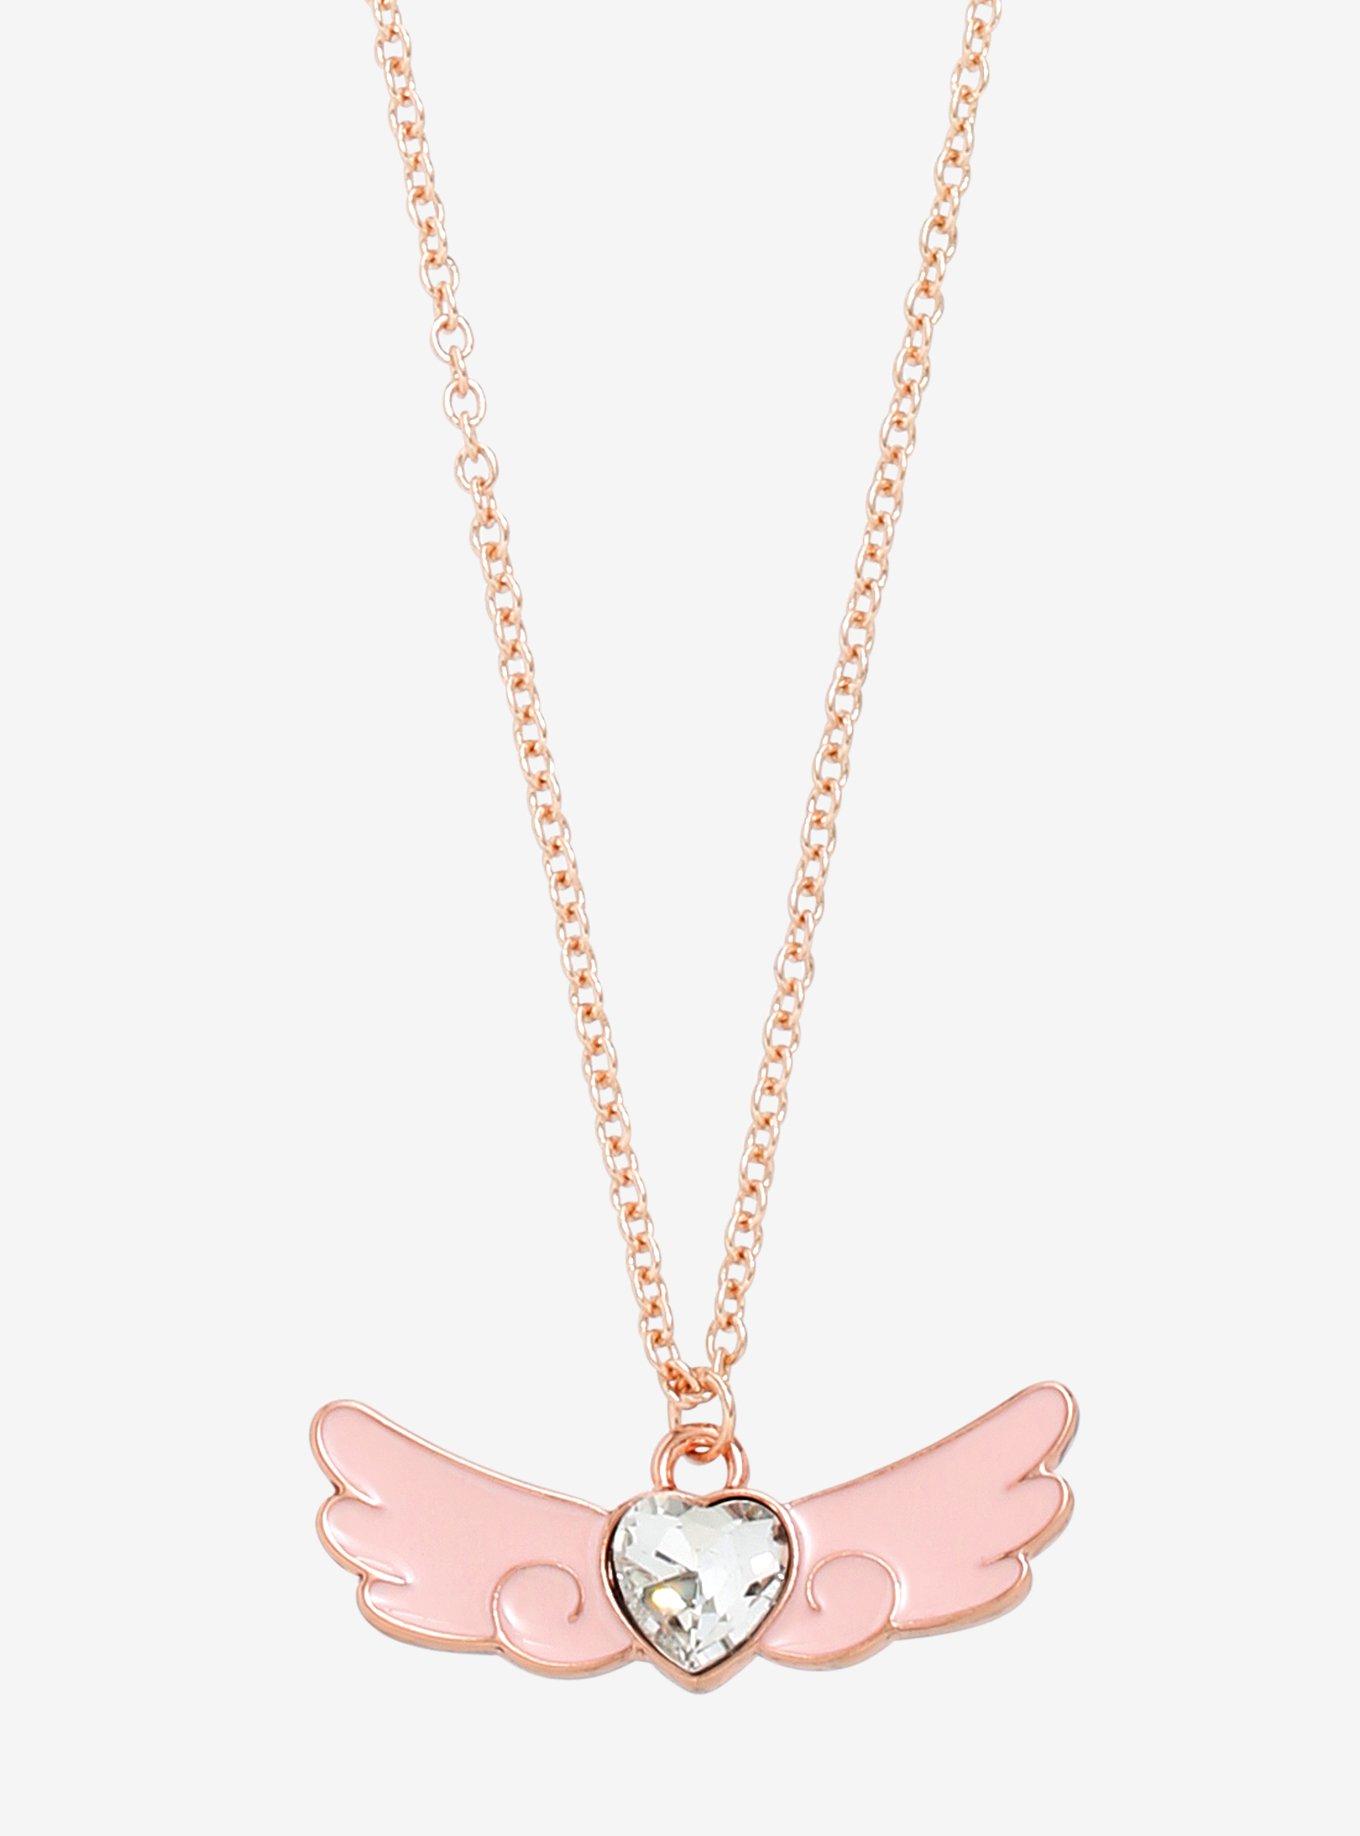 Cardcaptor Sakura: Clear Card Winged Heart Necklace | Hot Topic